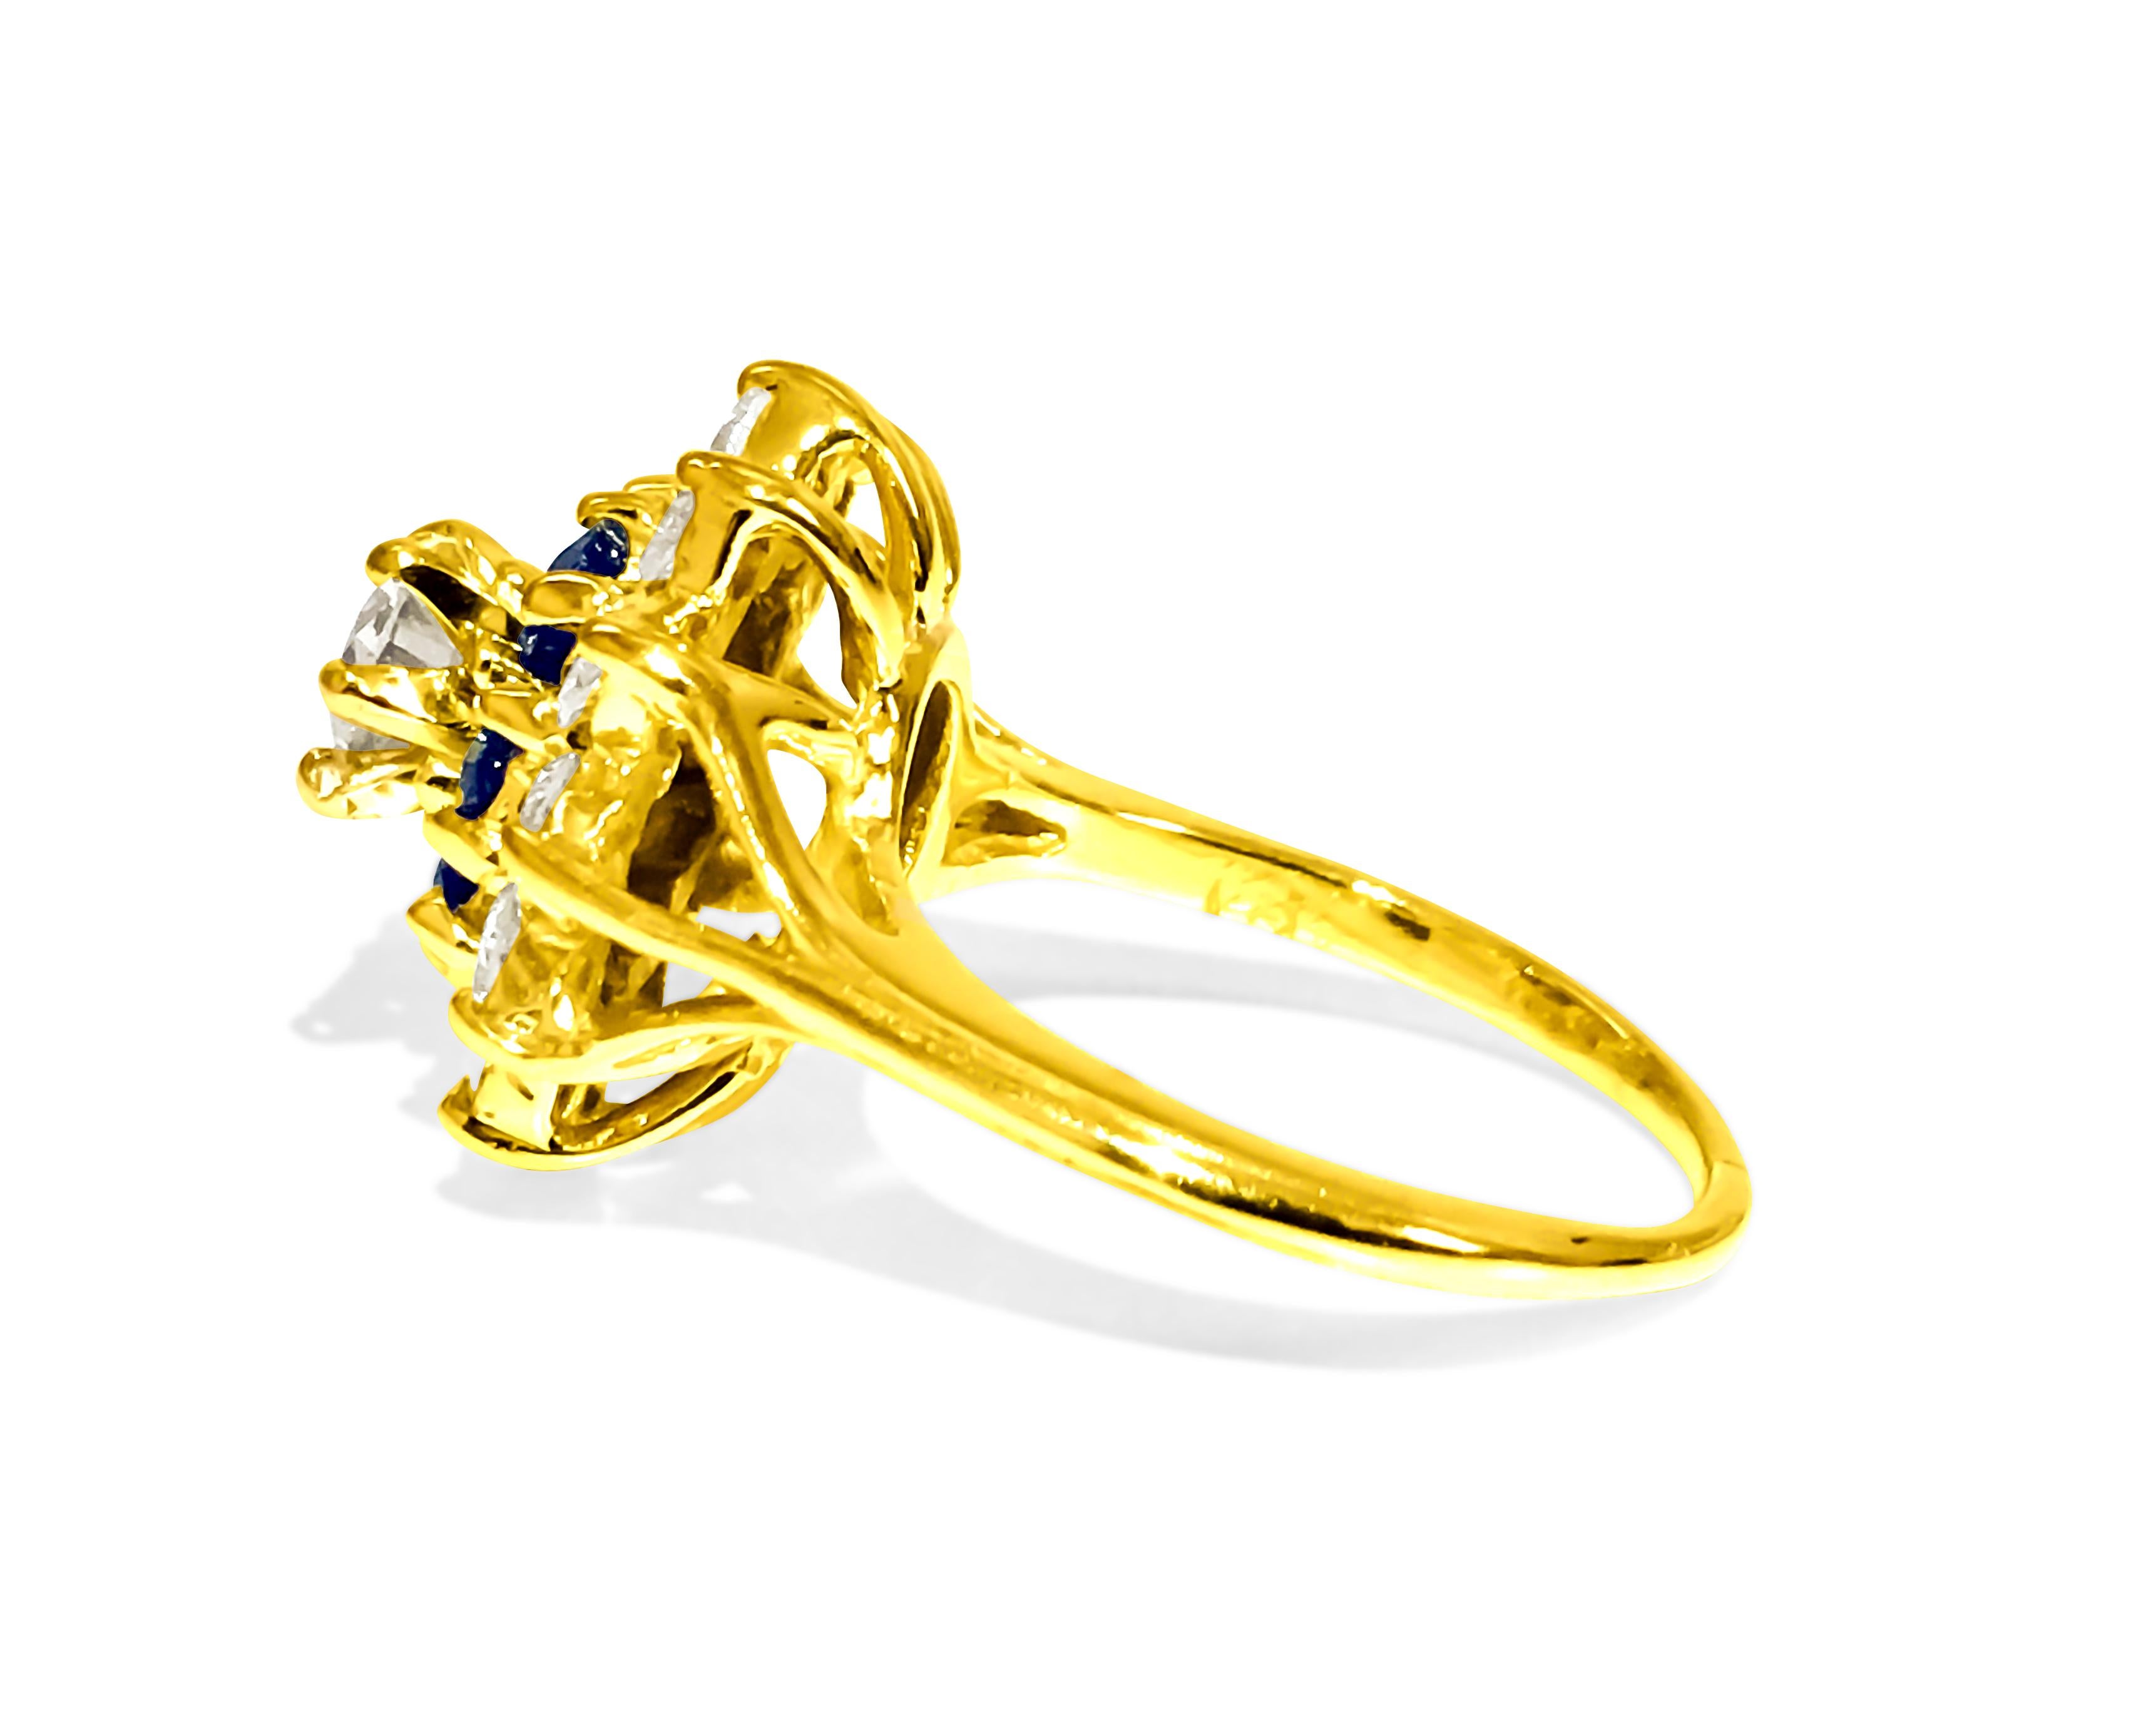 2.12 Carat Blue Sapphire Diamond Cocktail Ring 18 Karat Yellow Gold In Excellent Condition For Sale In Miami, FL